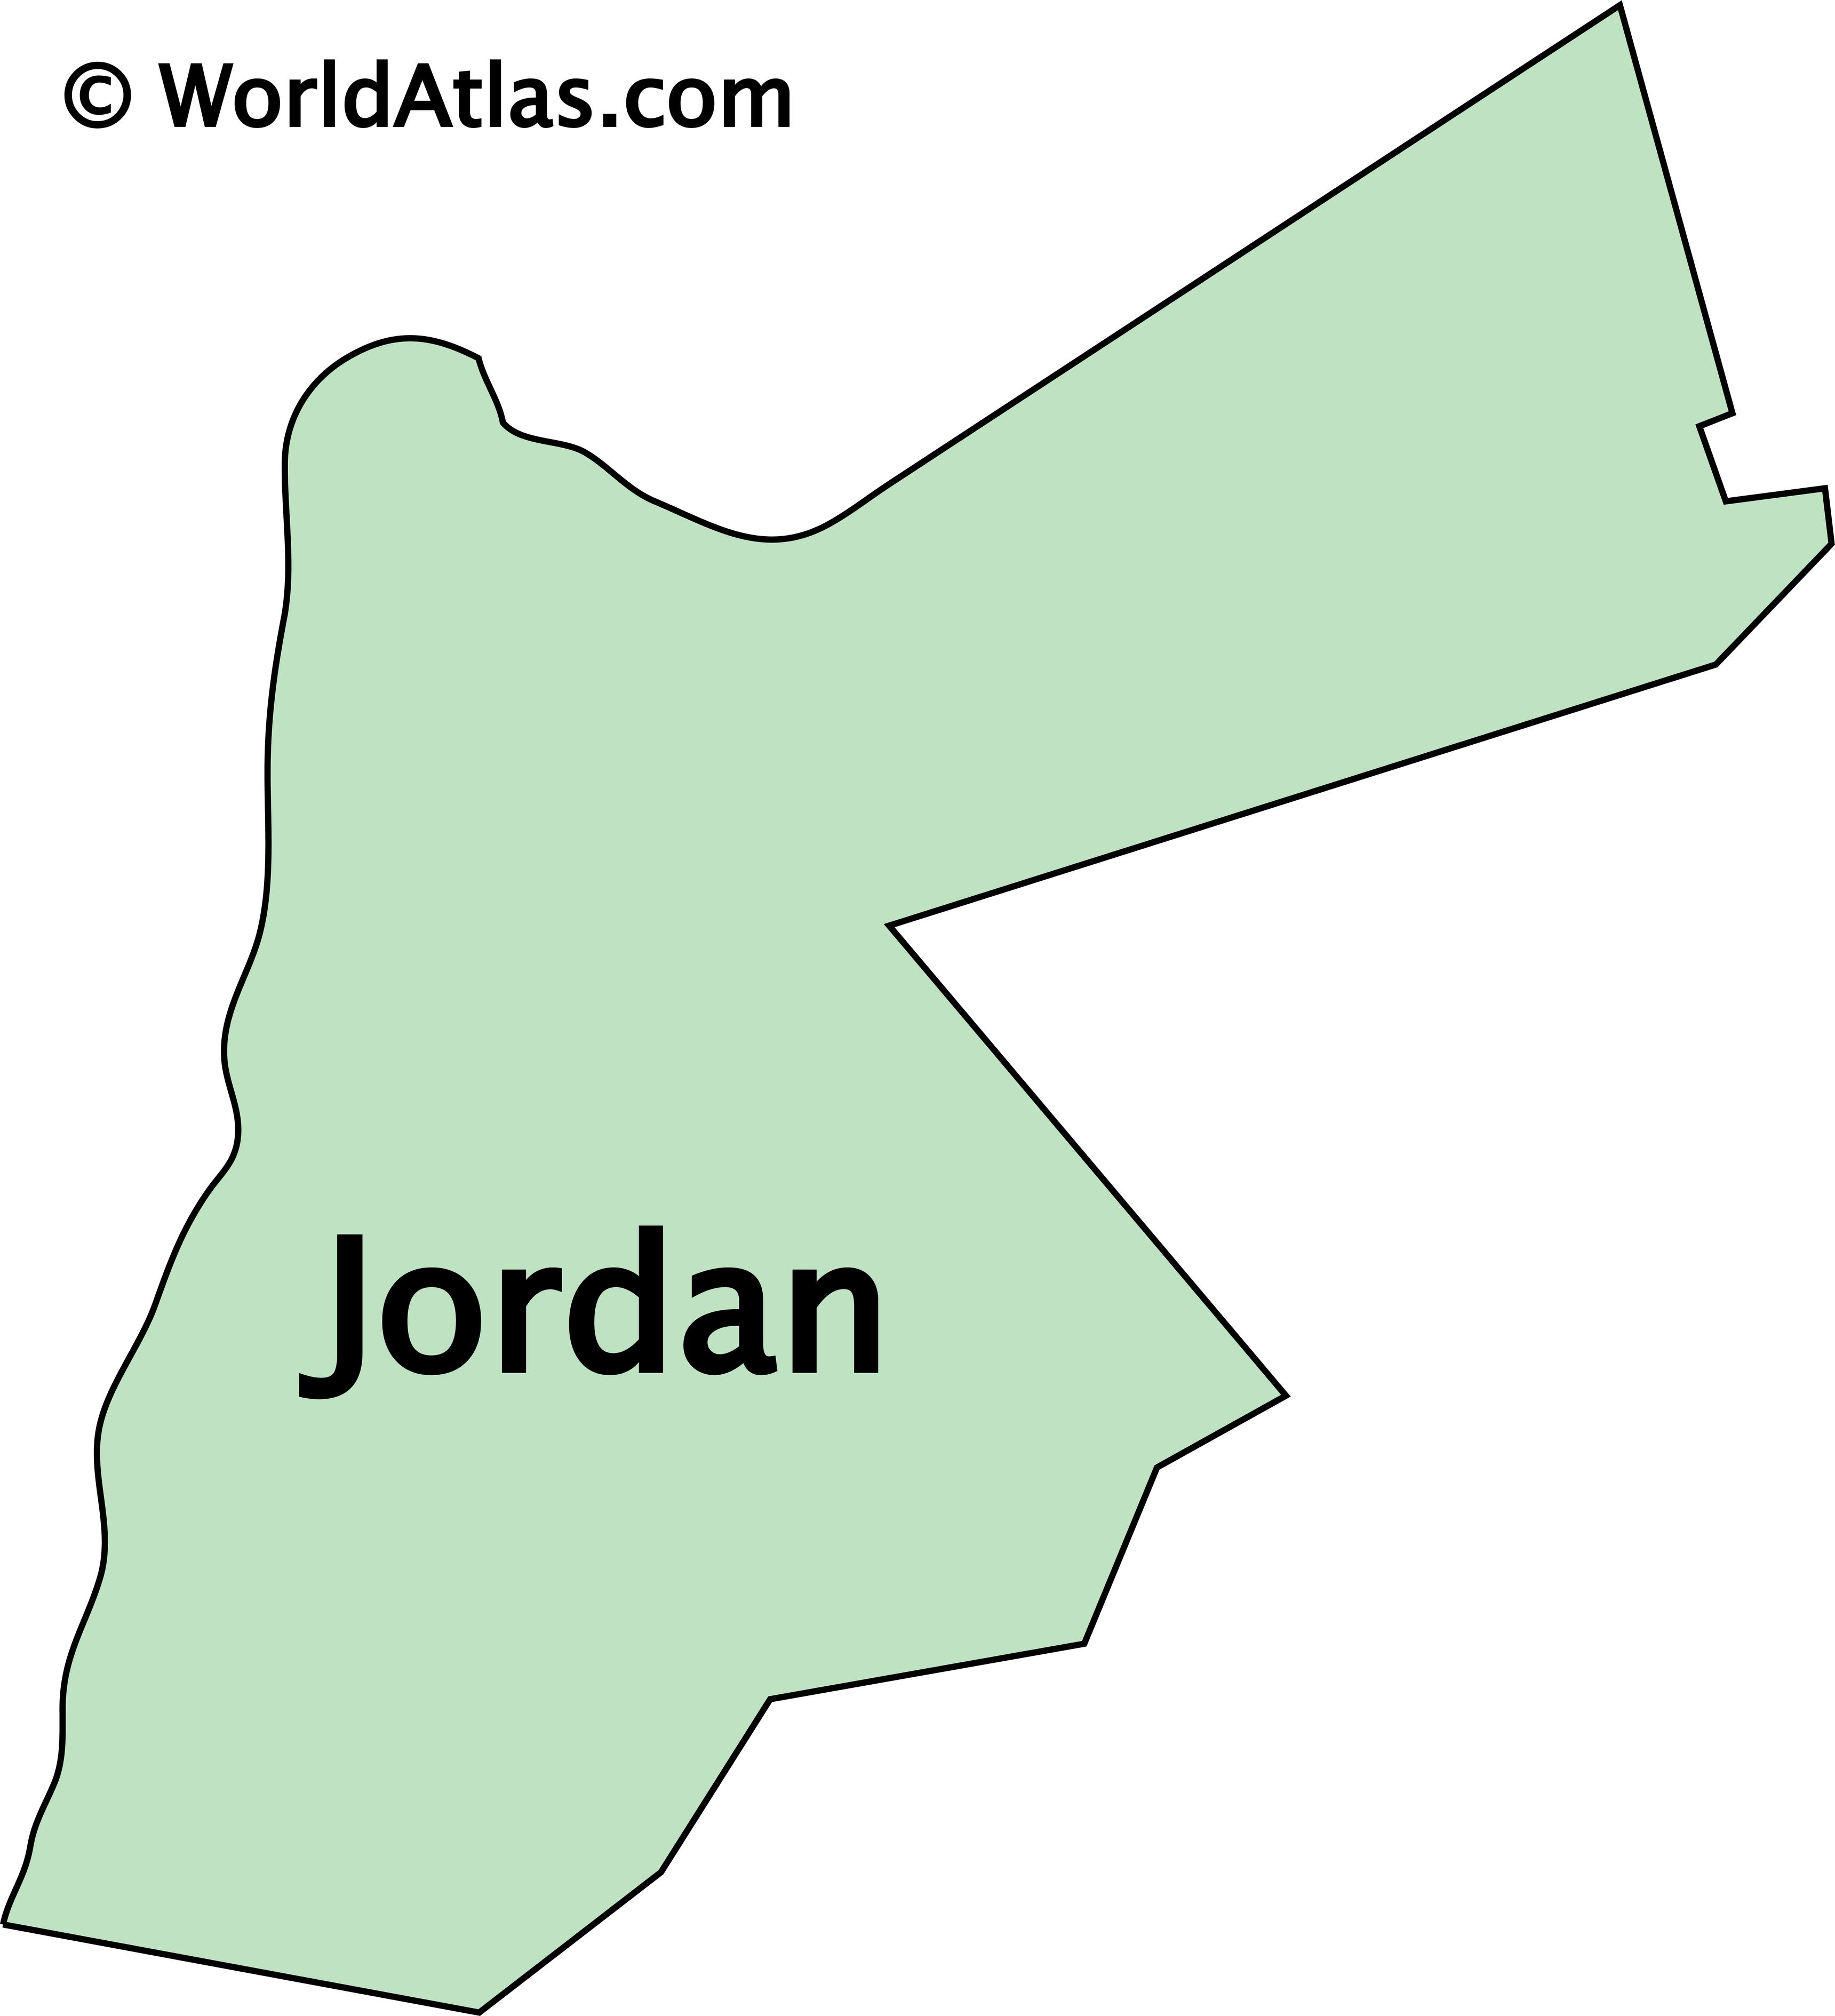 where is jordan situated